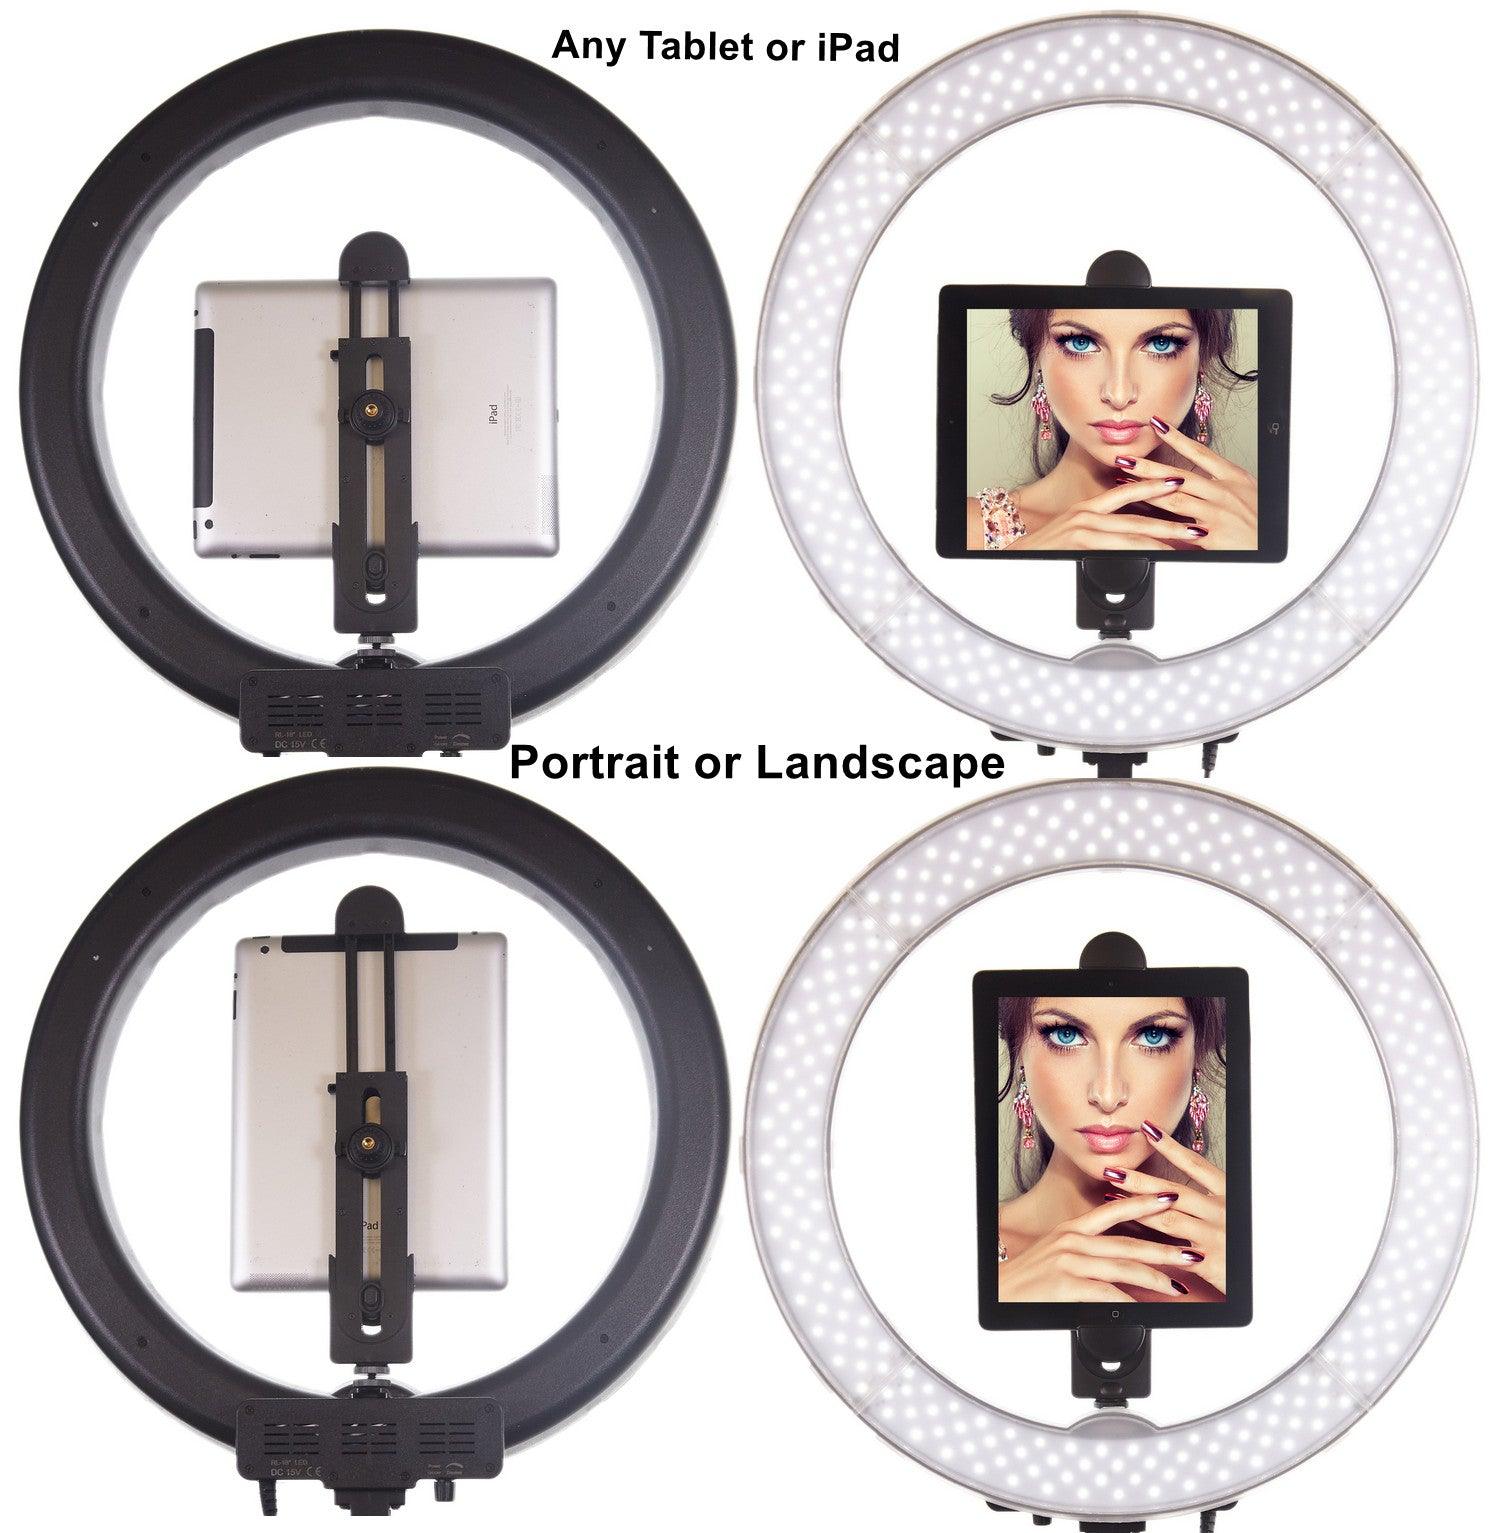 accumuleren Geheugen vinger The Socialite 18-Inch iPad Tablet Ring Light with Stand and Mirror –  Socialite Lighting